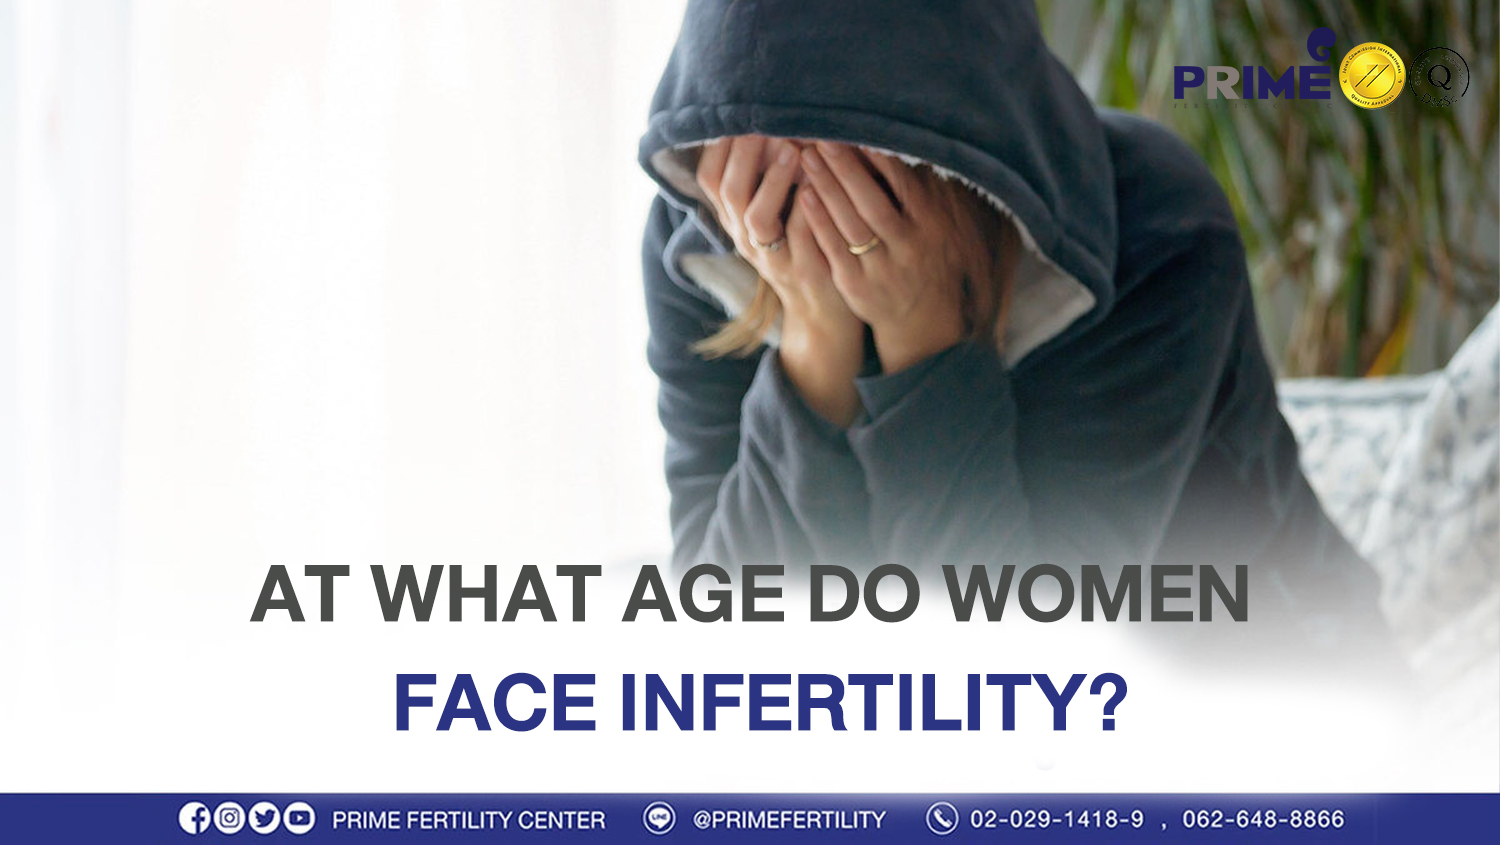 At what age do women face infertility?